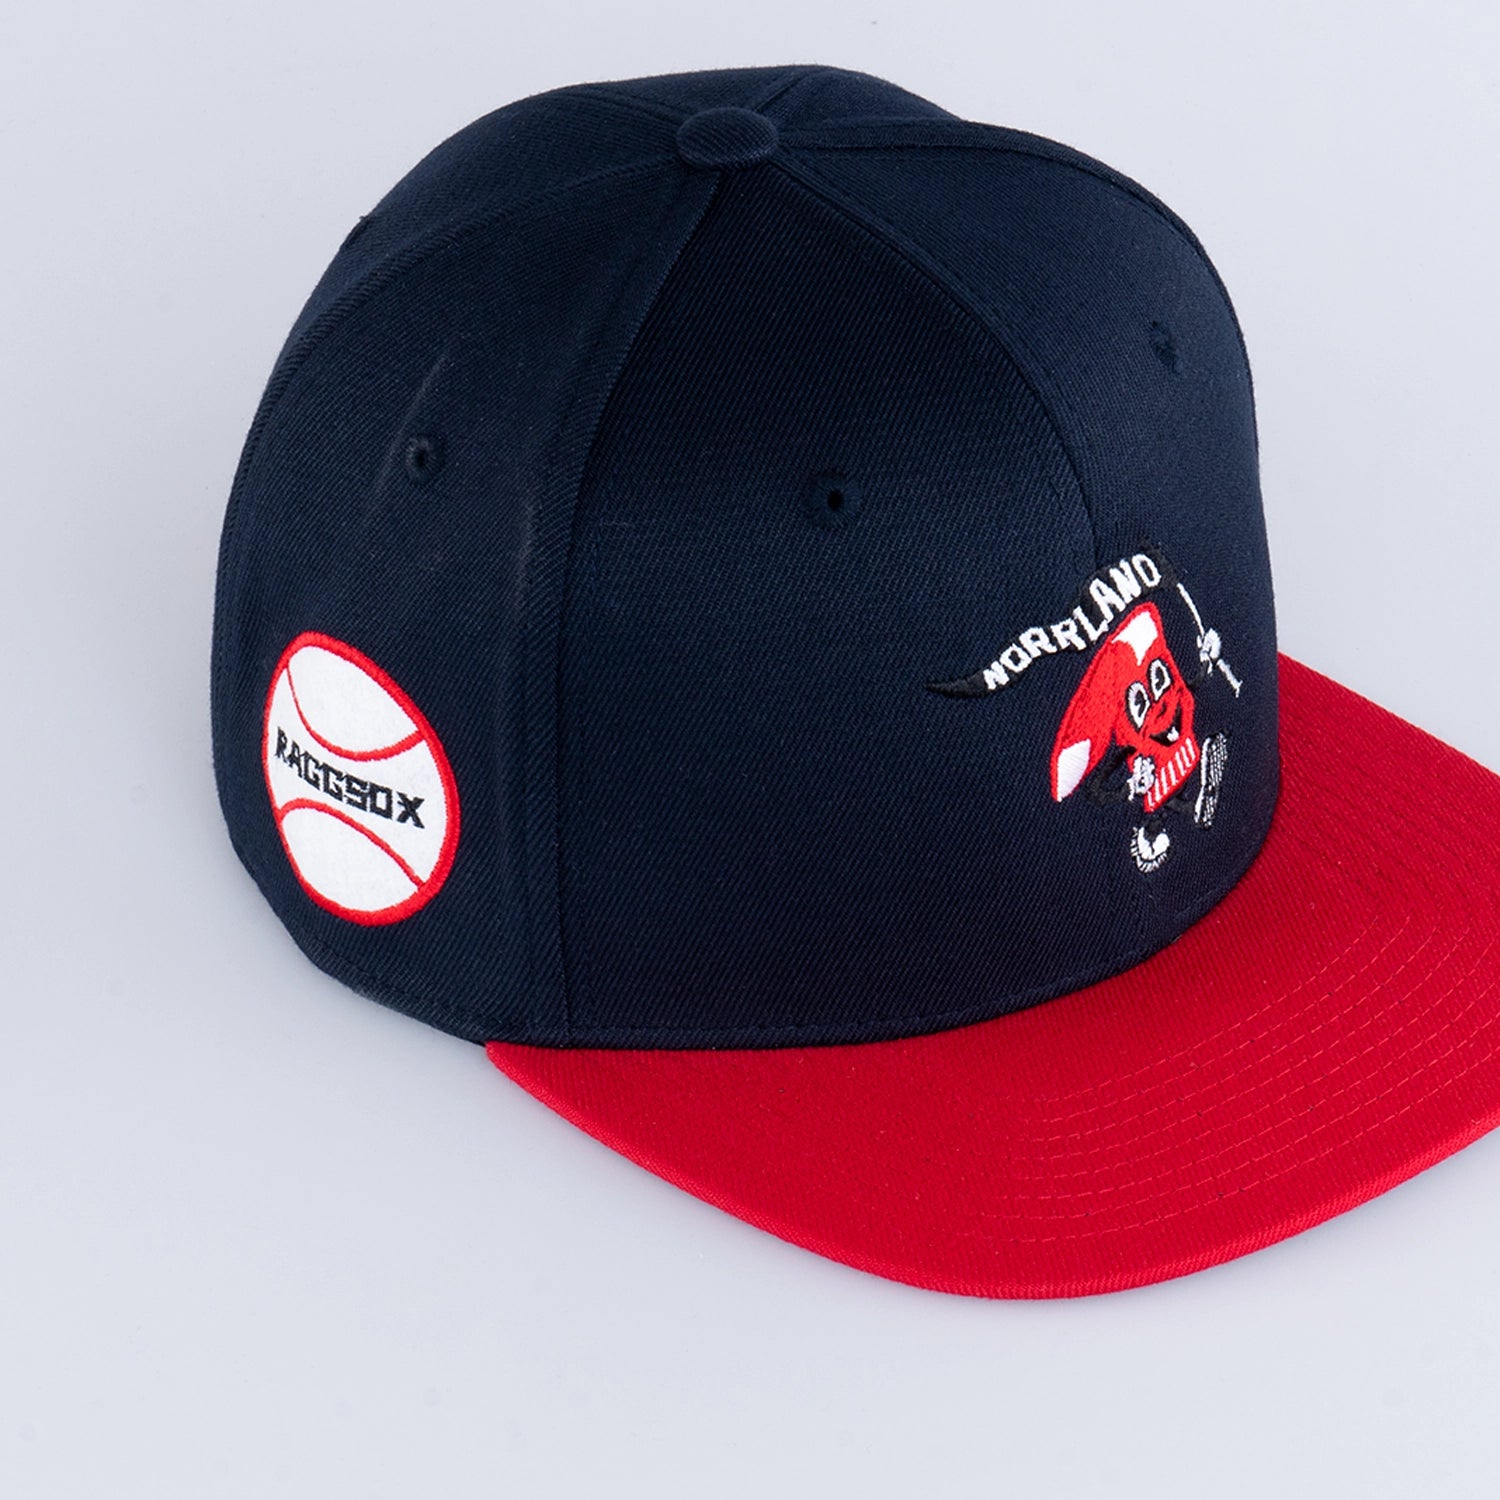 RAGGSOX FITTED CAP - NAVY / RED